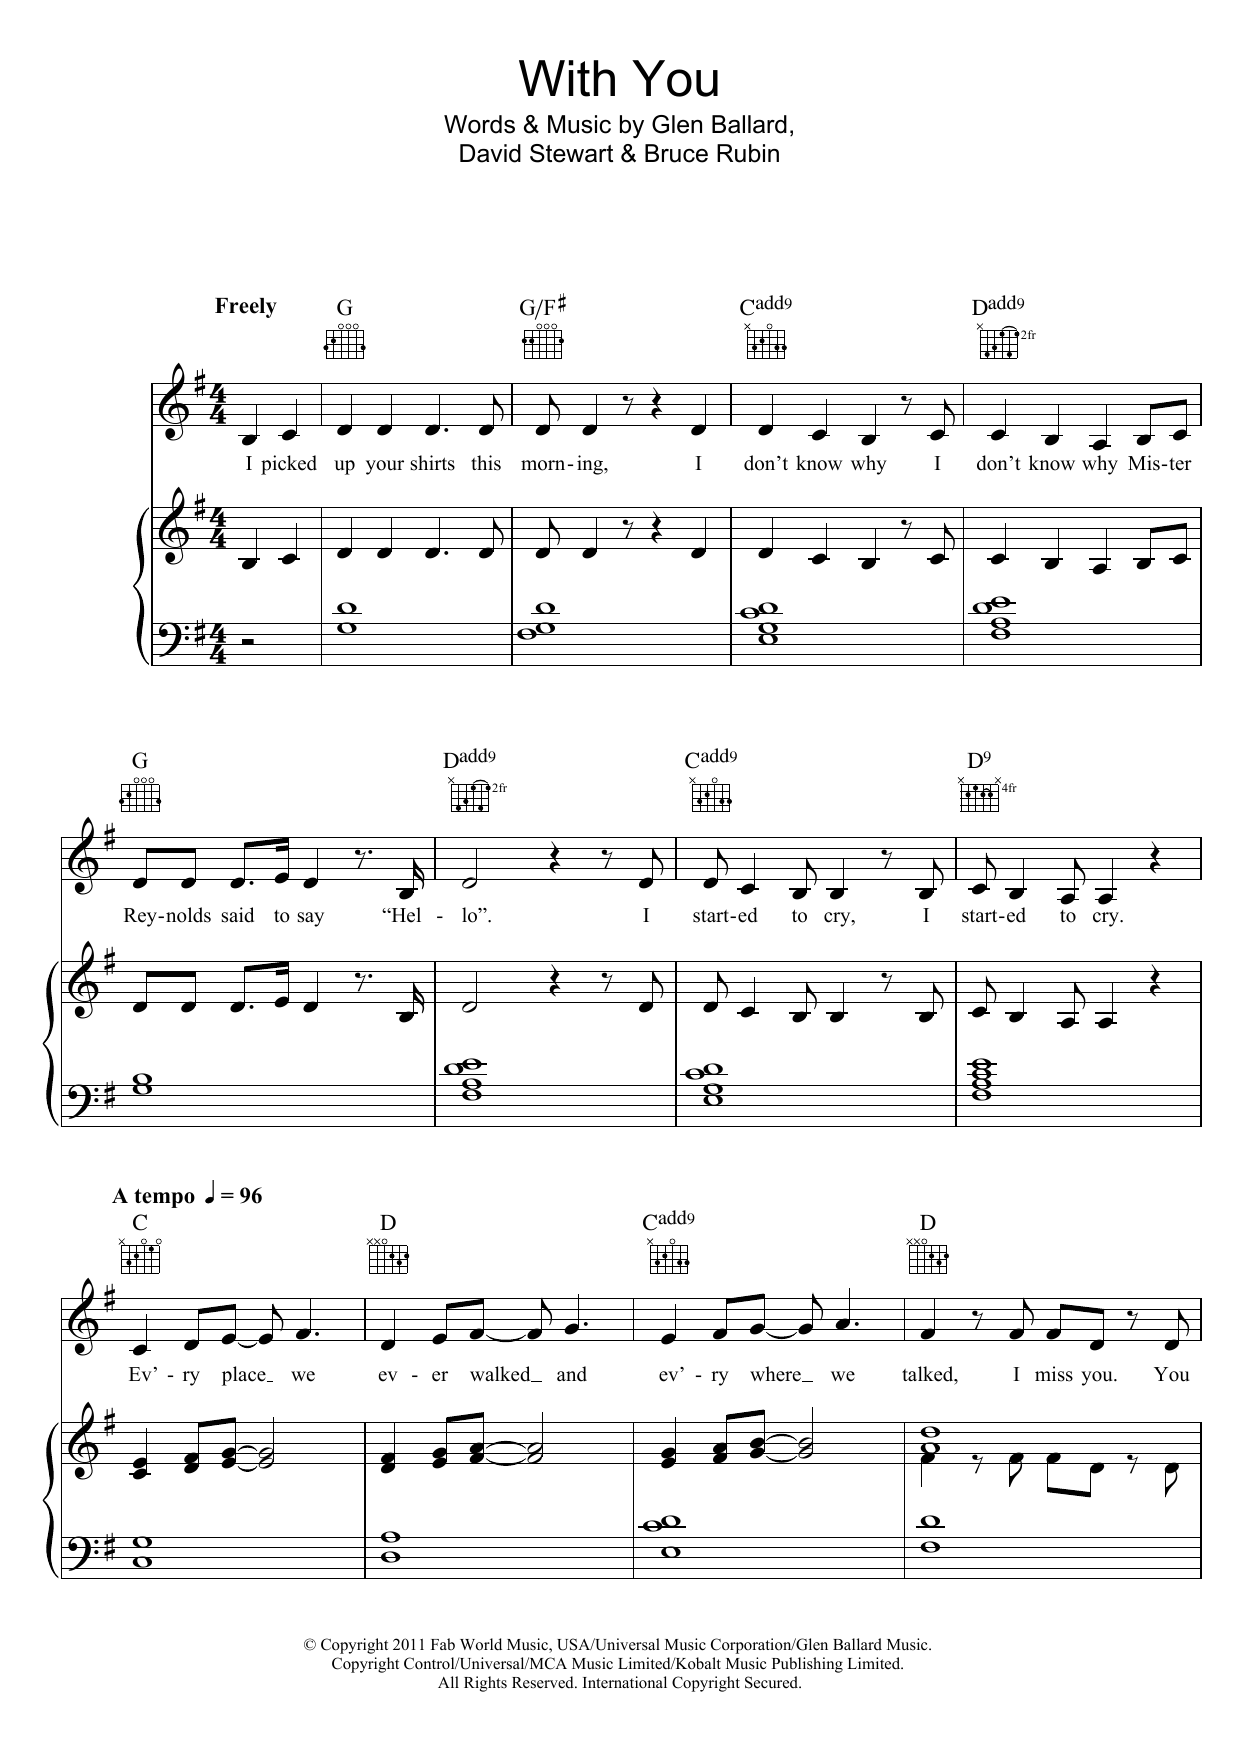 Ghost (Musical) With You sheet music notes and chords. Download Printable PDF.